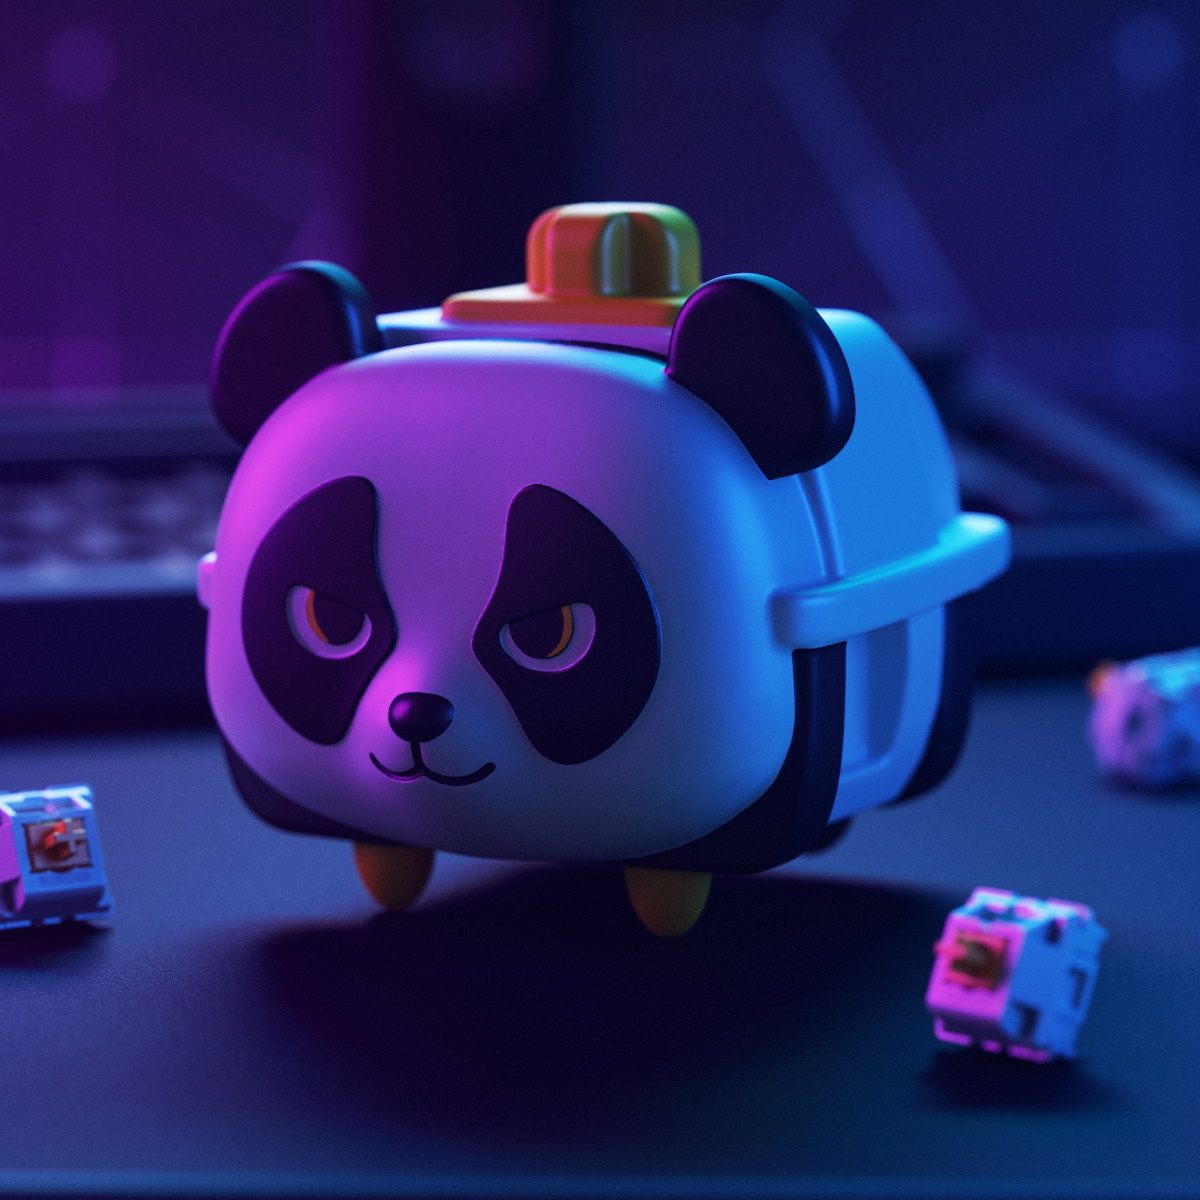 Vinyl Pandas and More! Check Out The Latest Range of Glorious Accessories -  Overclockers UK